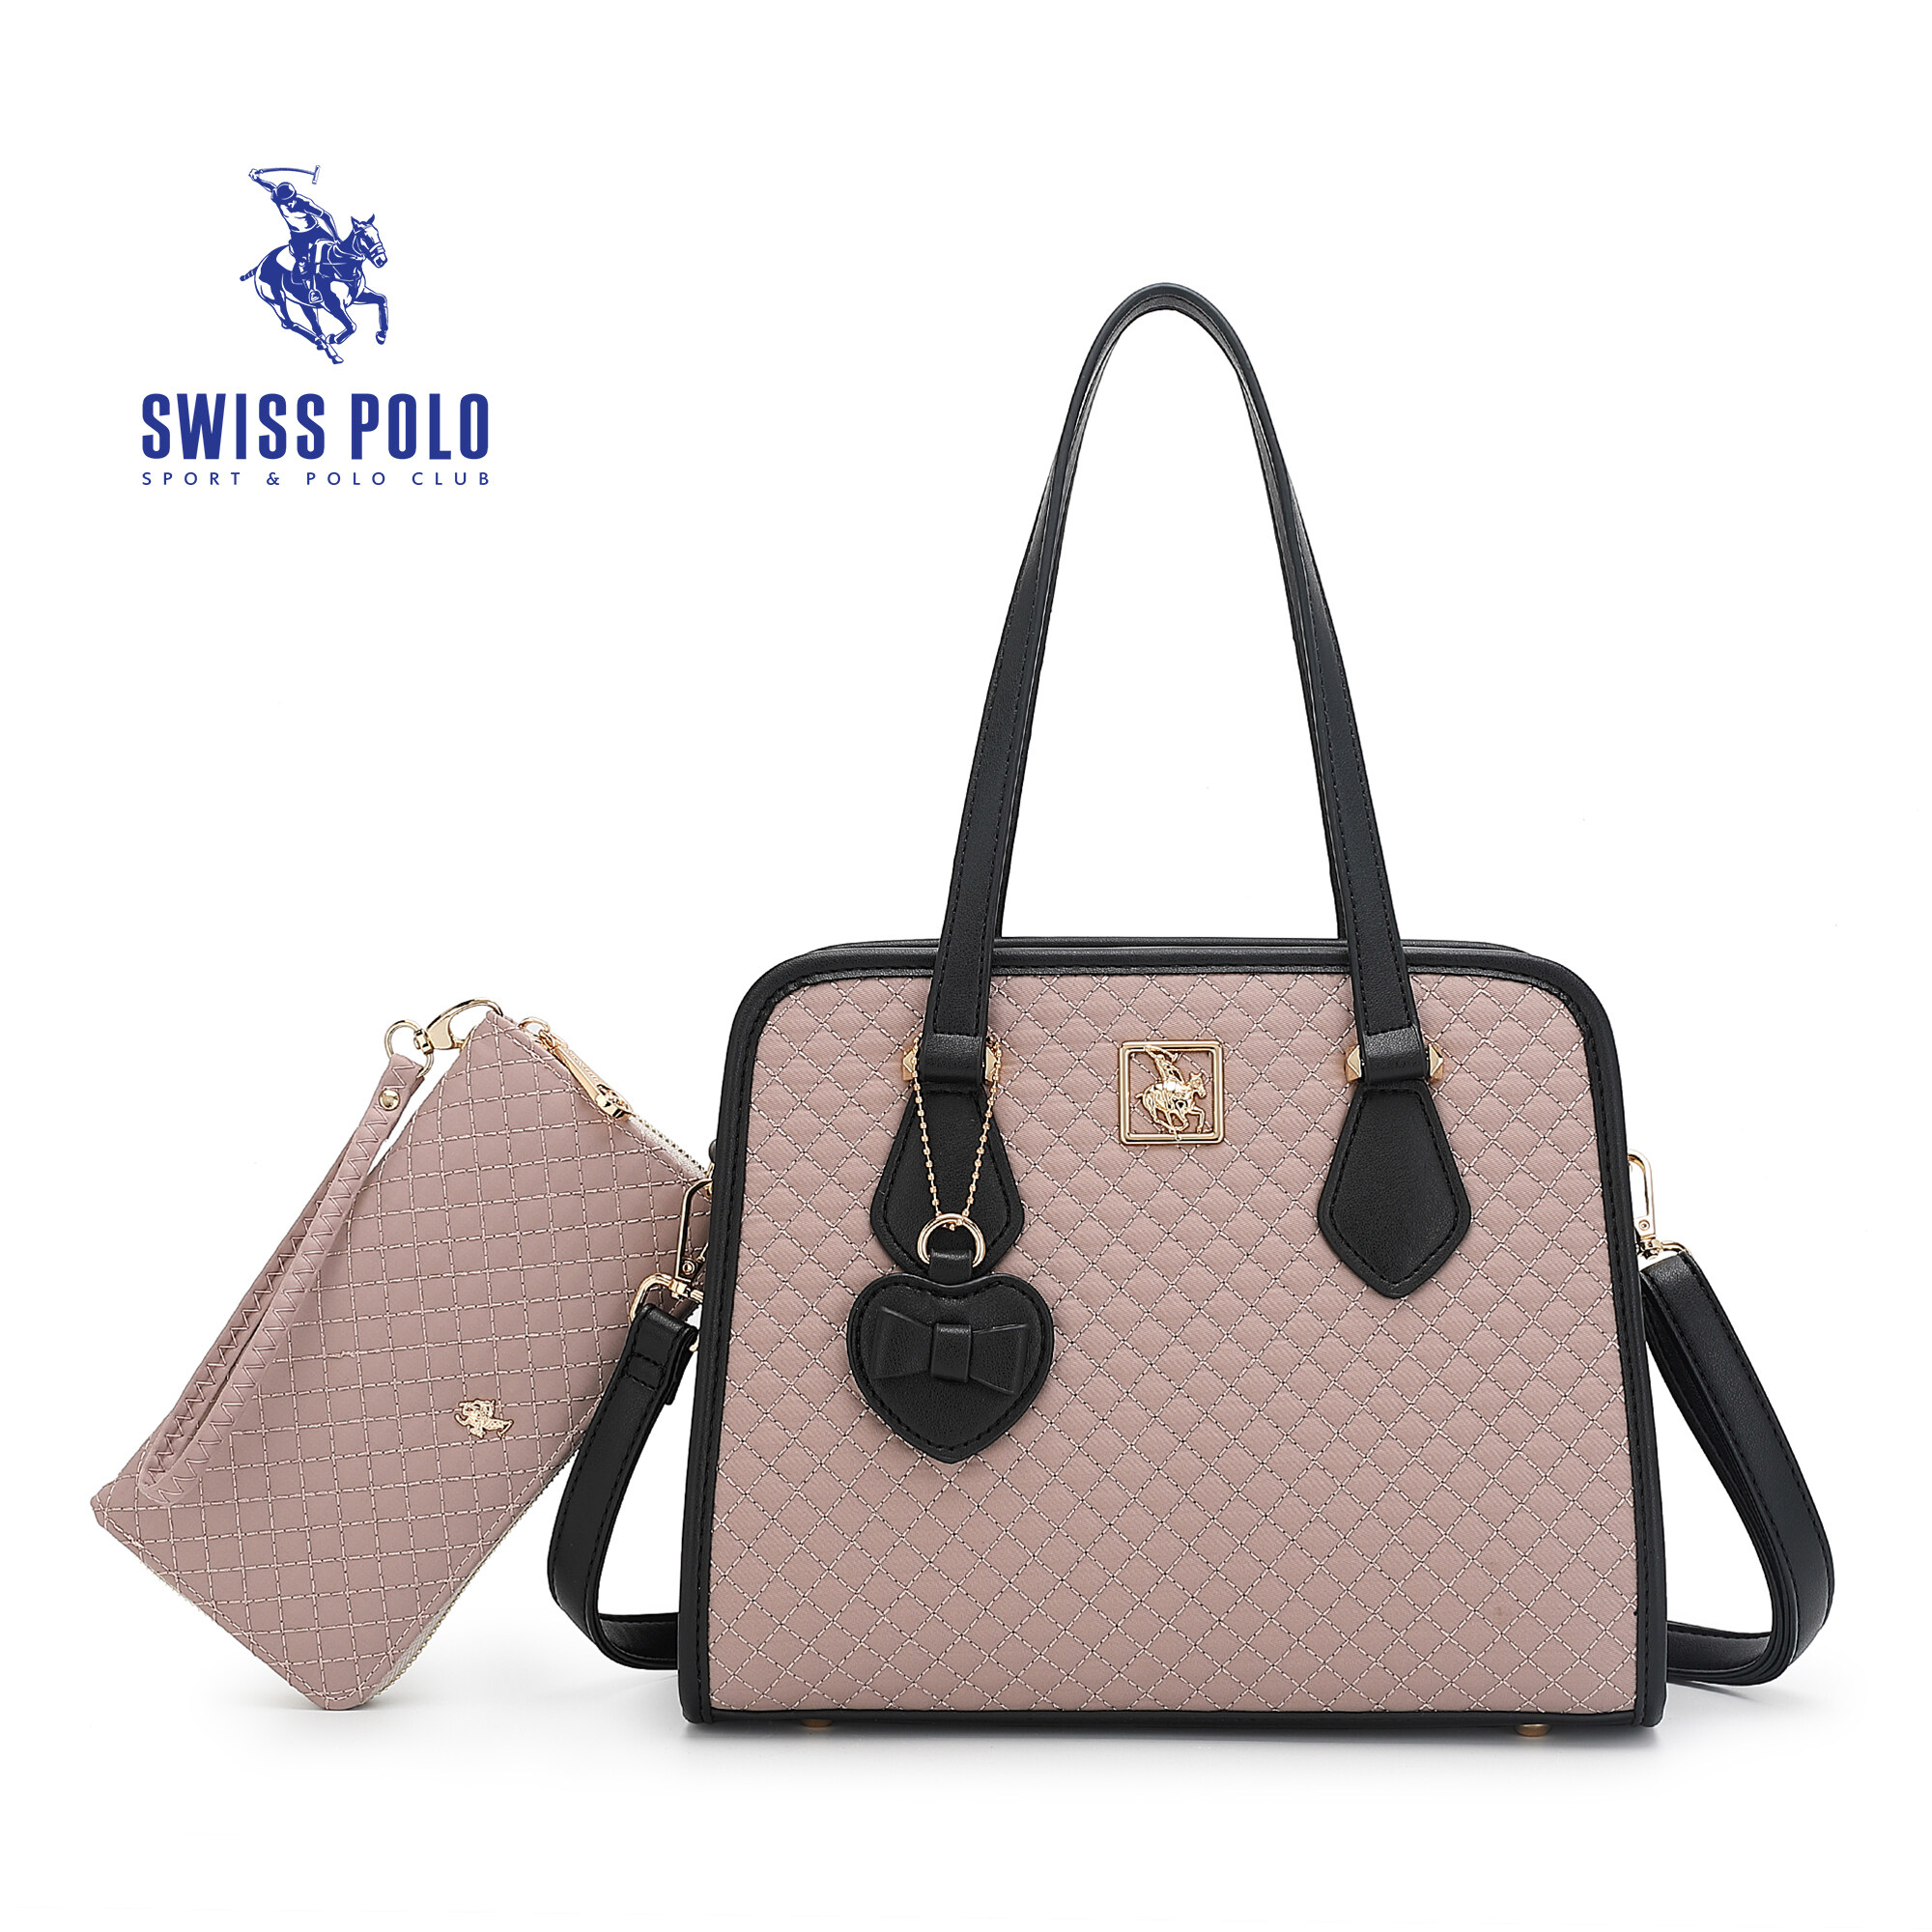 SWISS POLO 2 In 1 Ladies Quilted Top Handle Sling Bag With Long Purse HHN 3979-2 PINK